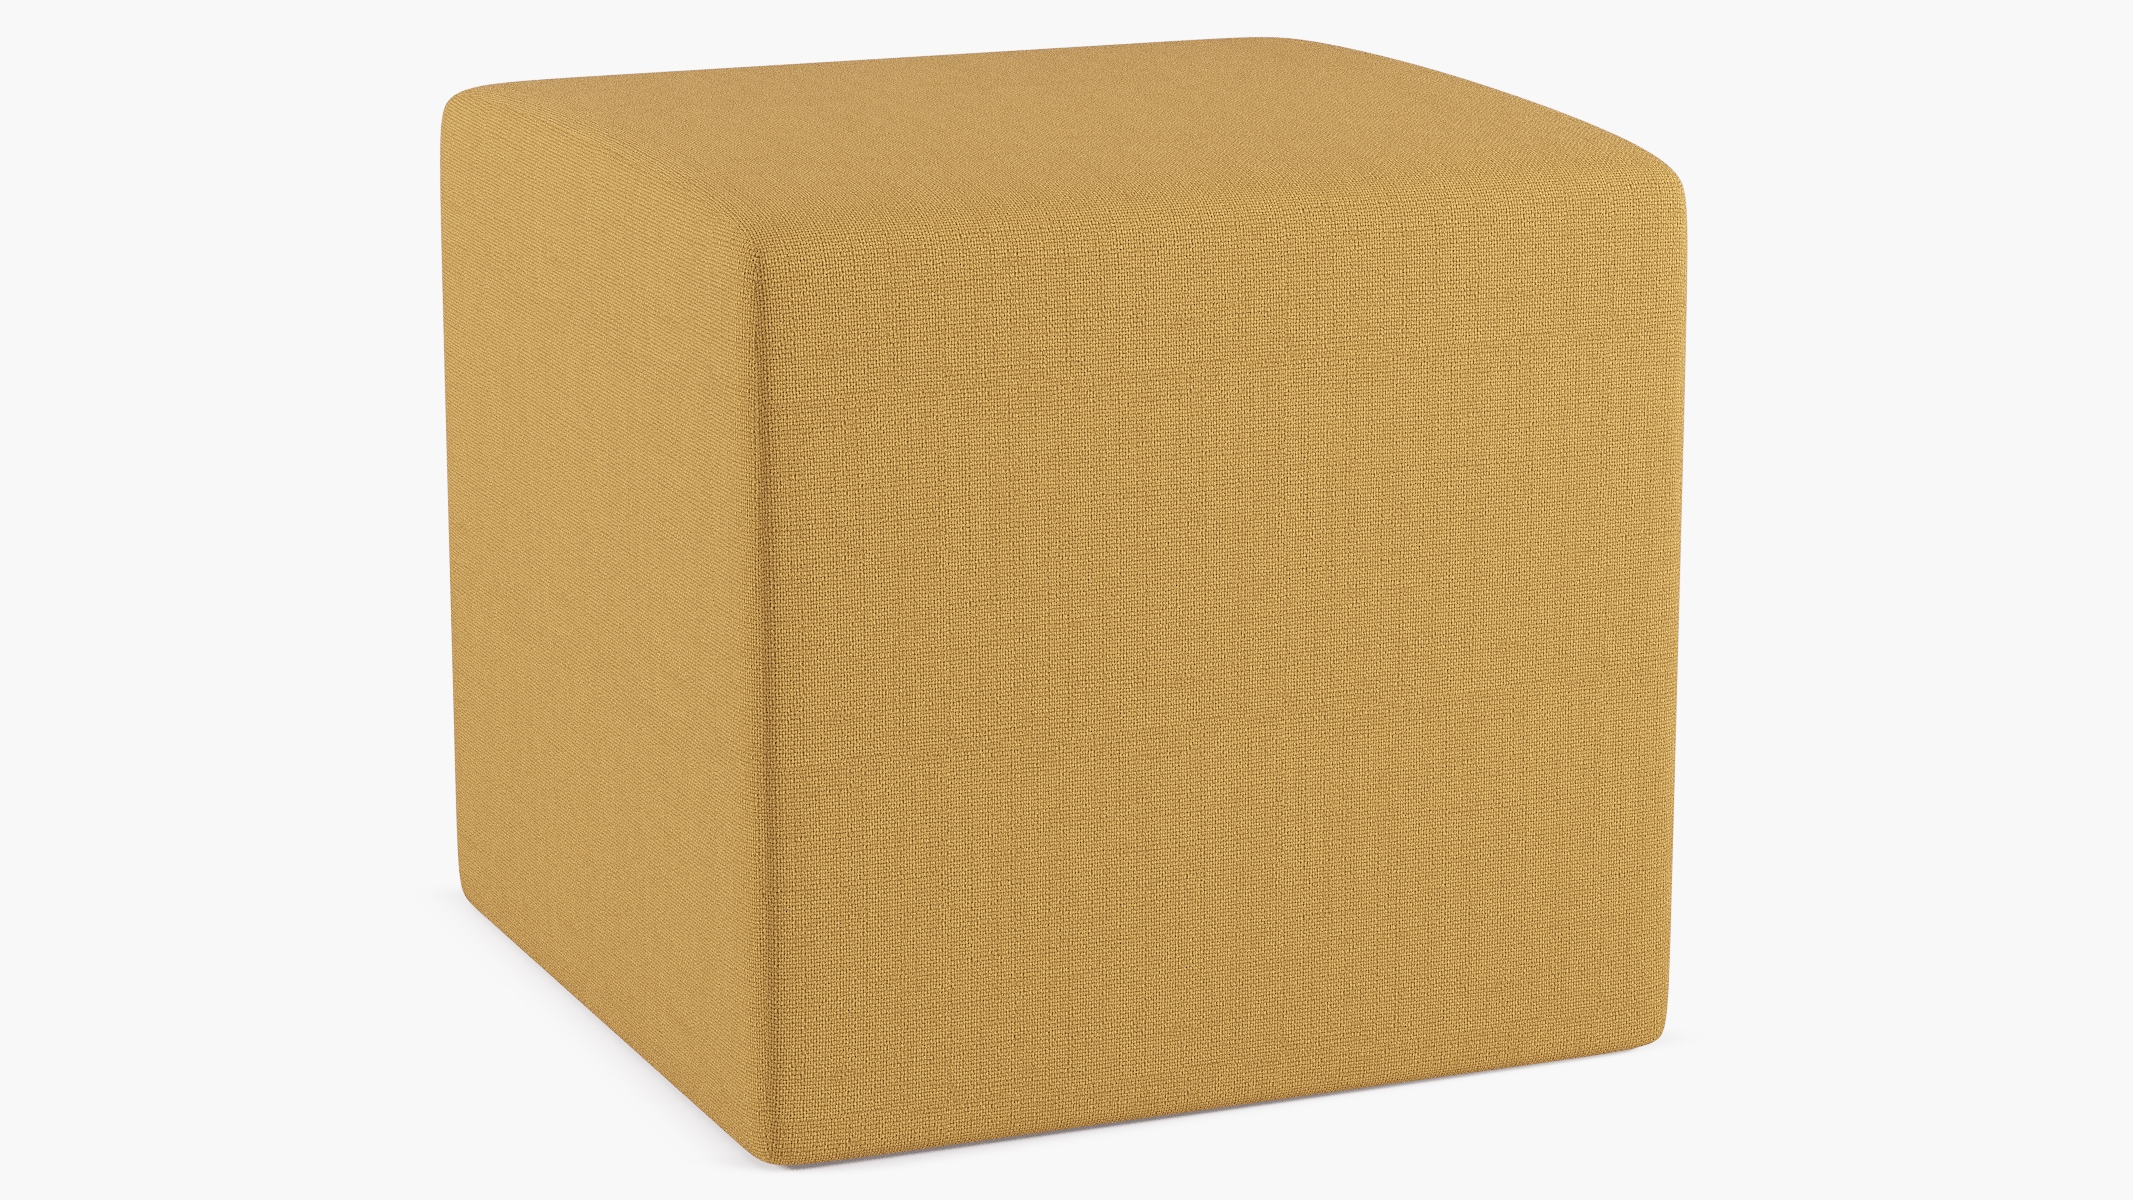 Cube Ottoman, French Yellow Everyday Linen - Image 1